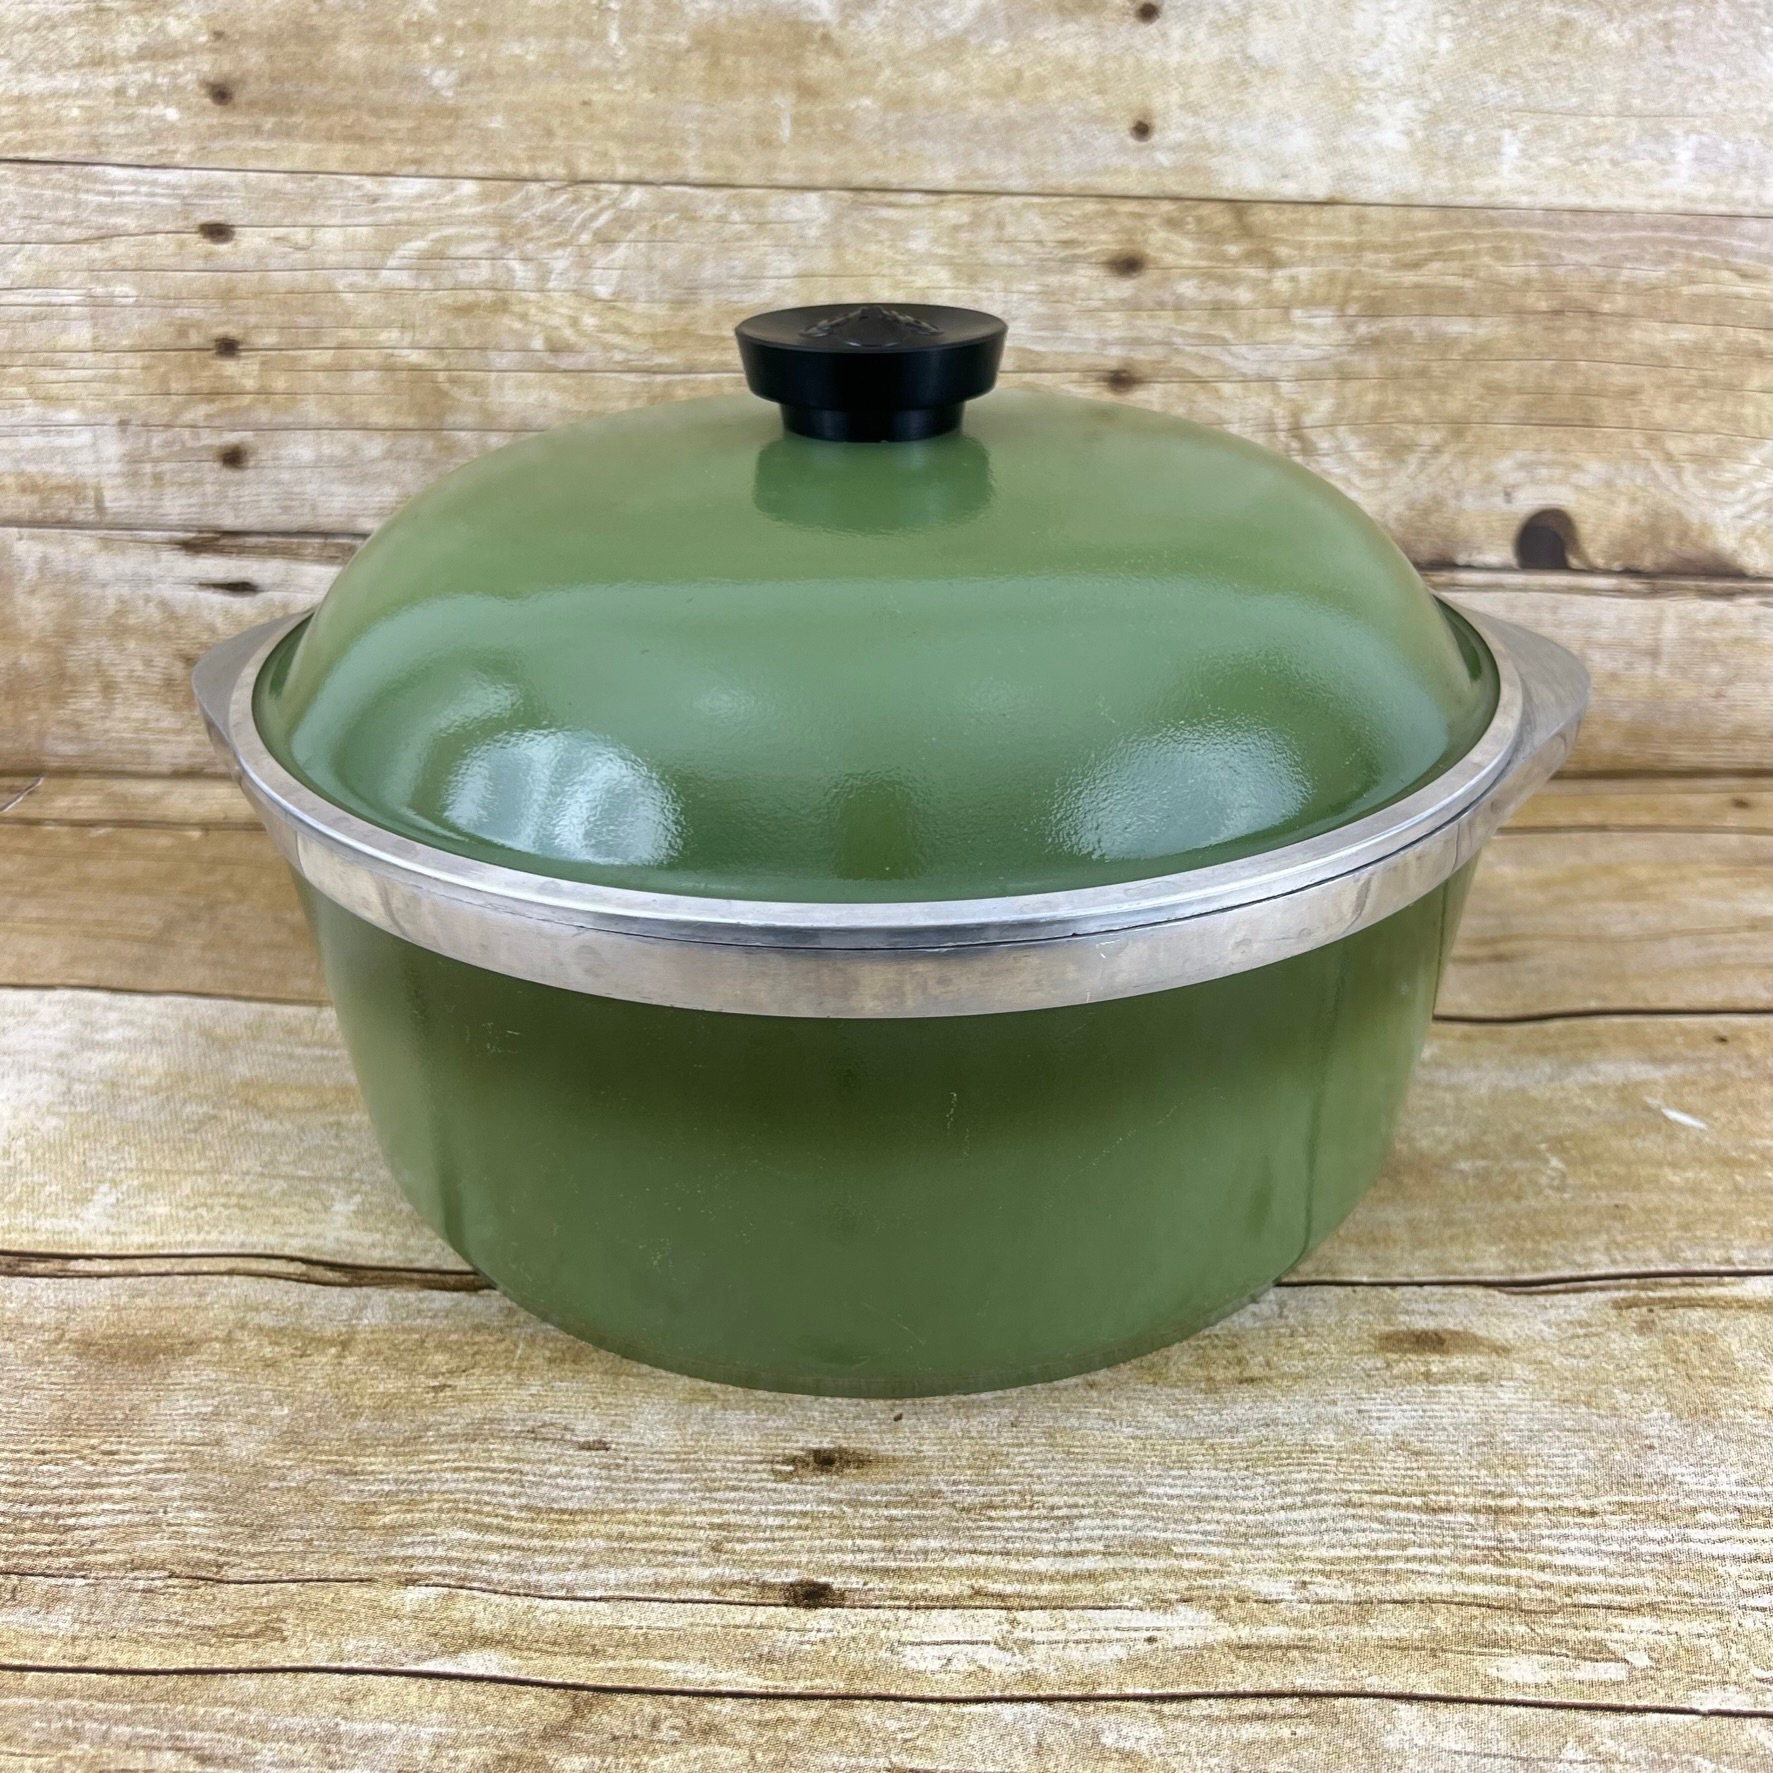 Japanese Rice Pot Ricecooker Pot Ironworks 2L Wooden Lid Cast Iron Pot 3  Cup,mothers Day Gift 